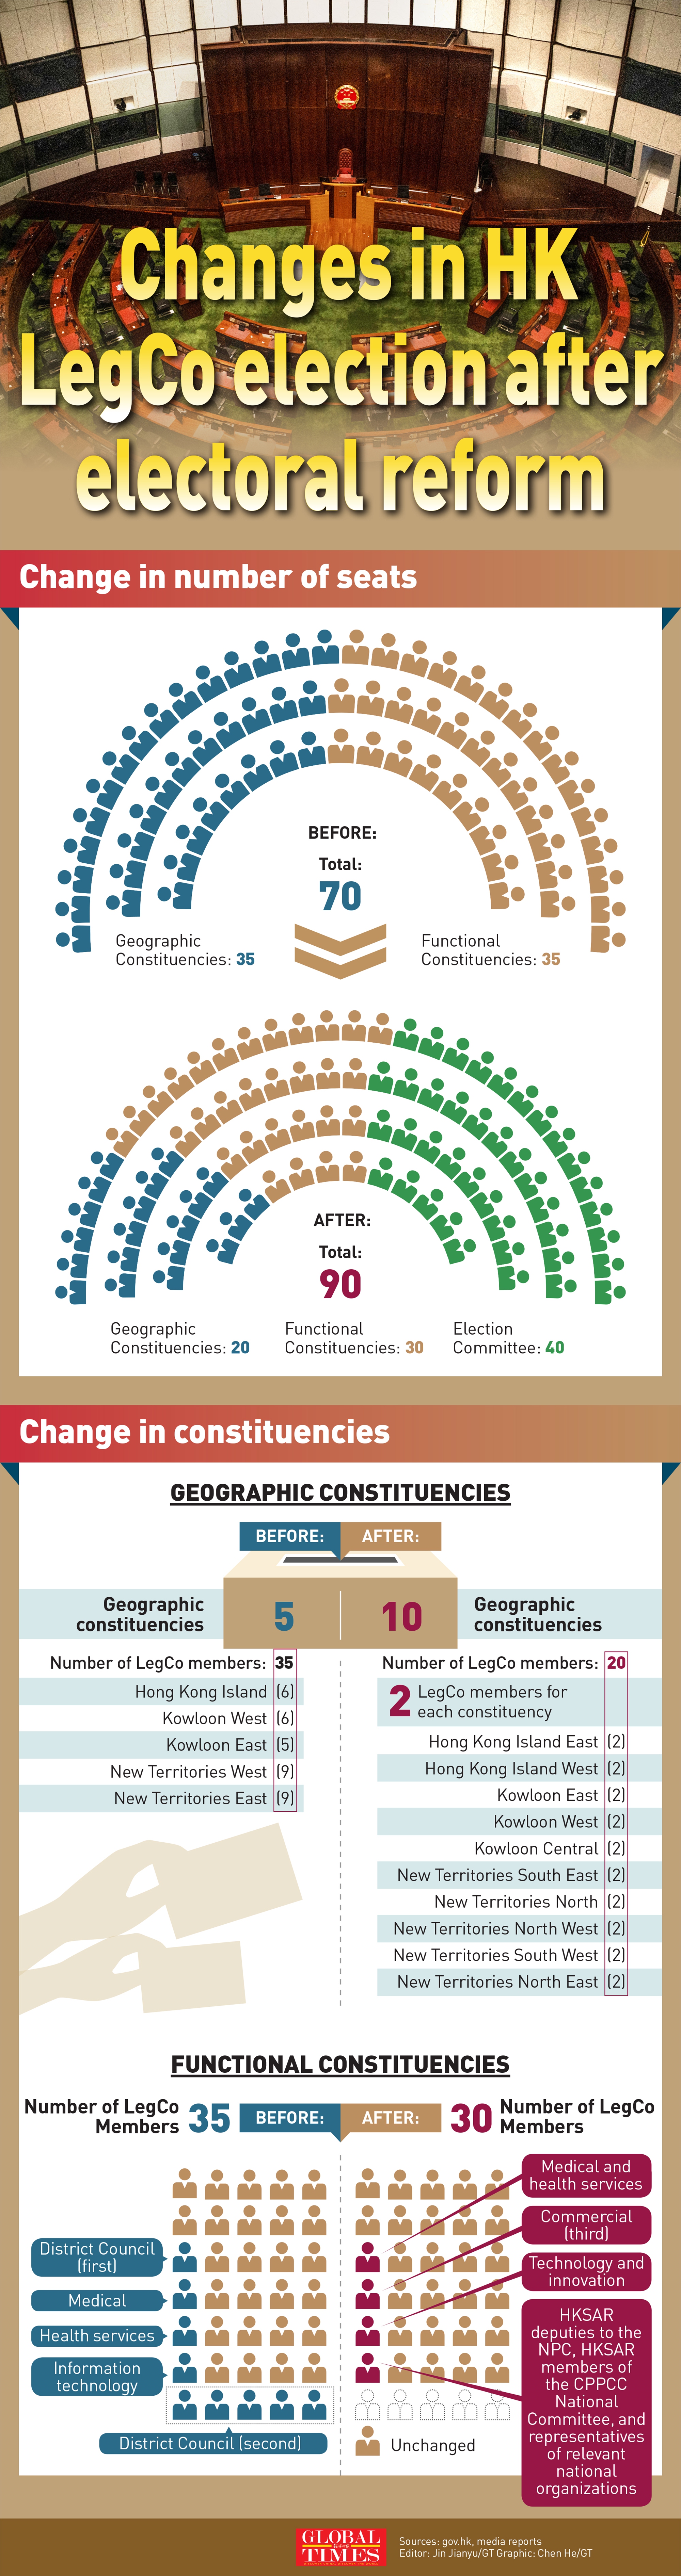 Changes in HK LegCo election after electoral reform.Graphic:Global Times